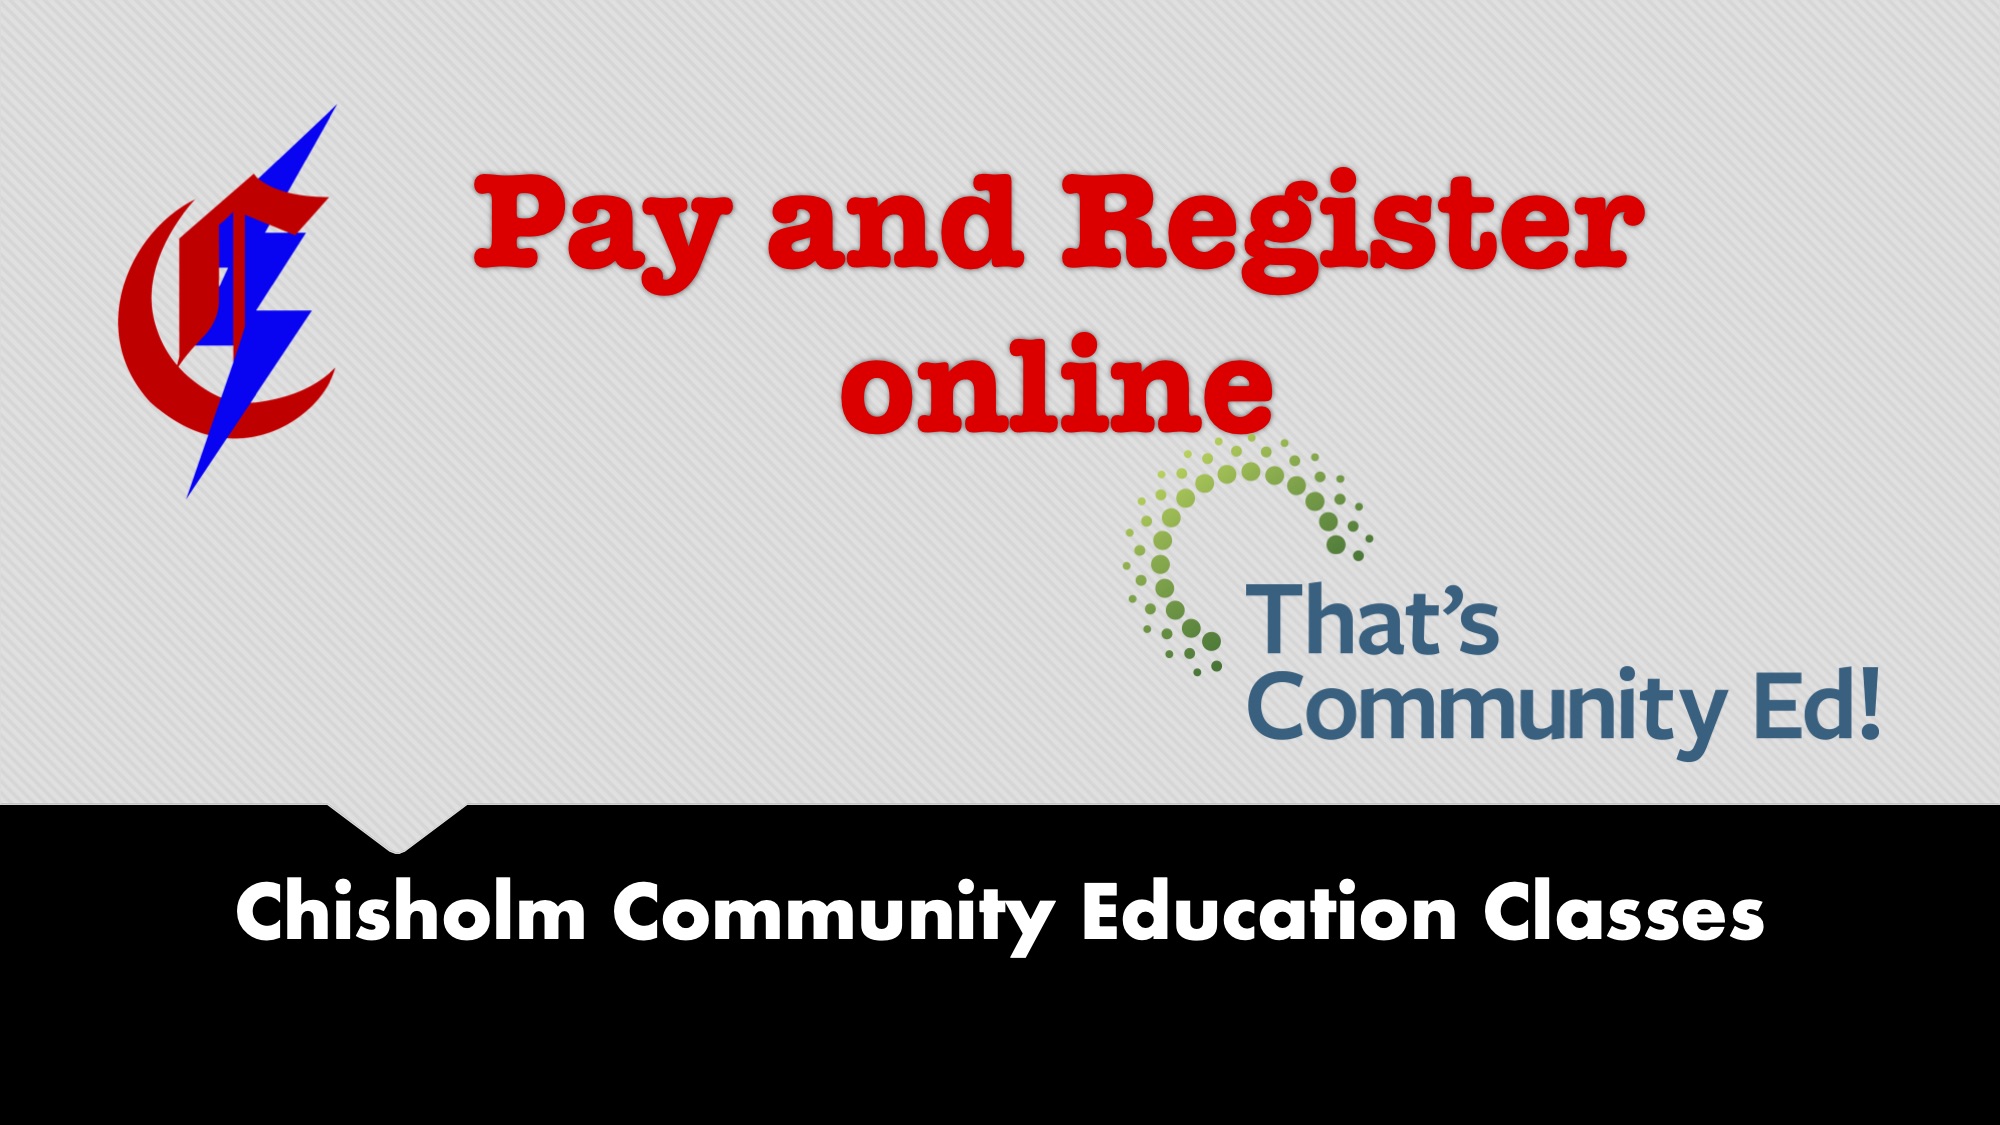 Pay and Register Online